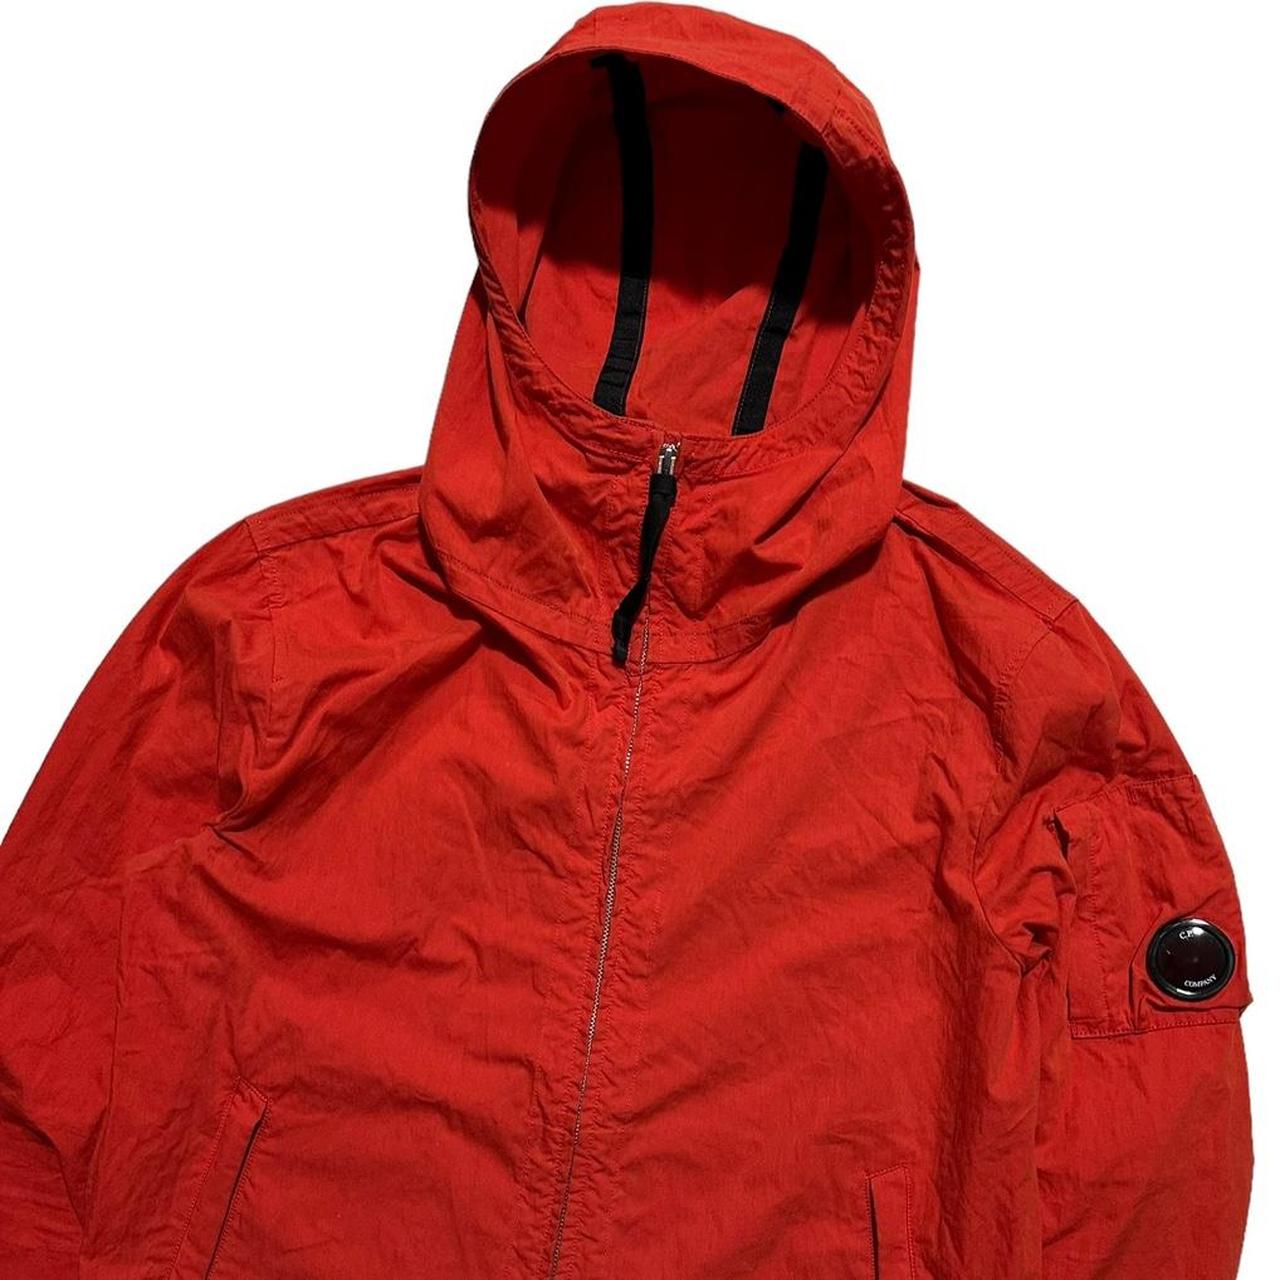 CP Company 50 Filli Red Canvas Jacket